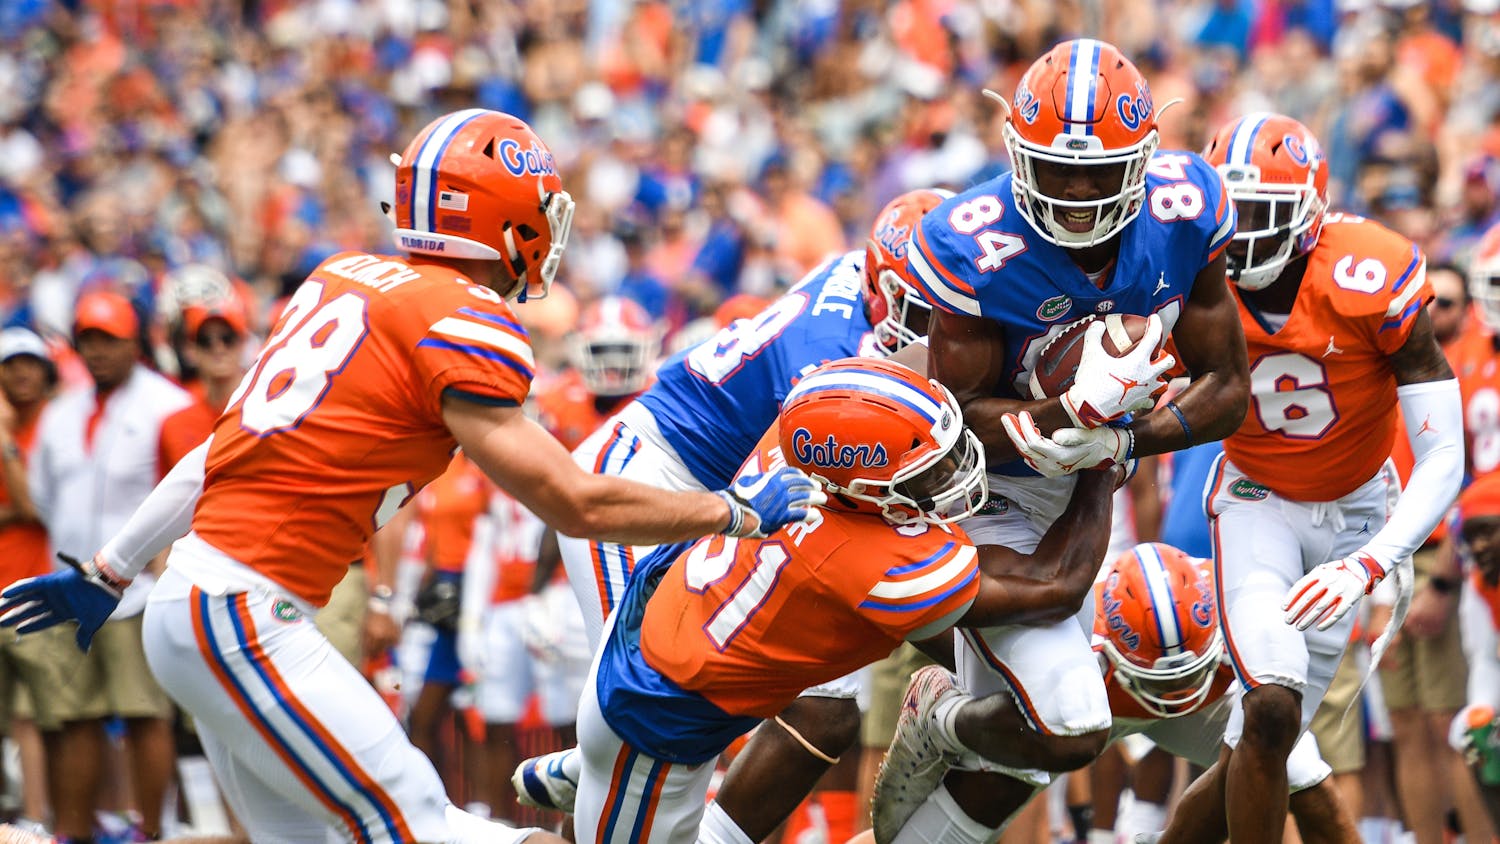 Tight end Kyle Pitts recorded four catches for 56 yards for the Blue team in UF's Orange and Blue game. Blue was defeated by Orange 60-35 in the highest-scoring spring game of all time. 